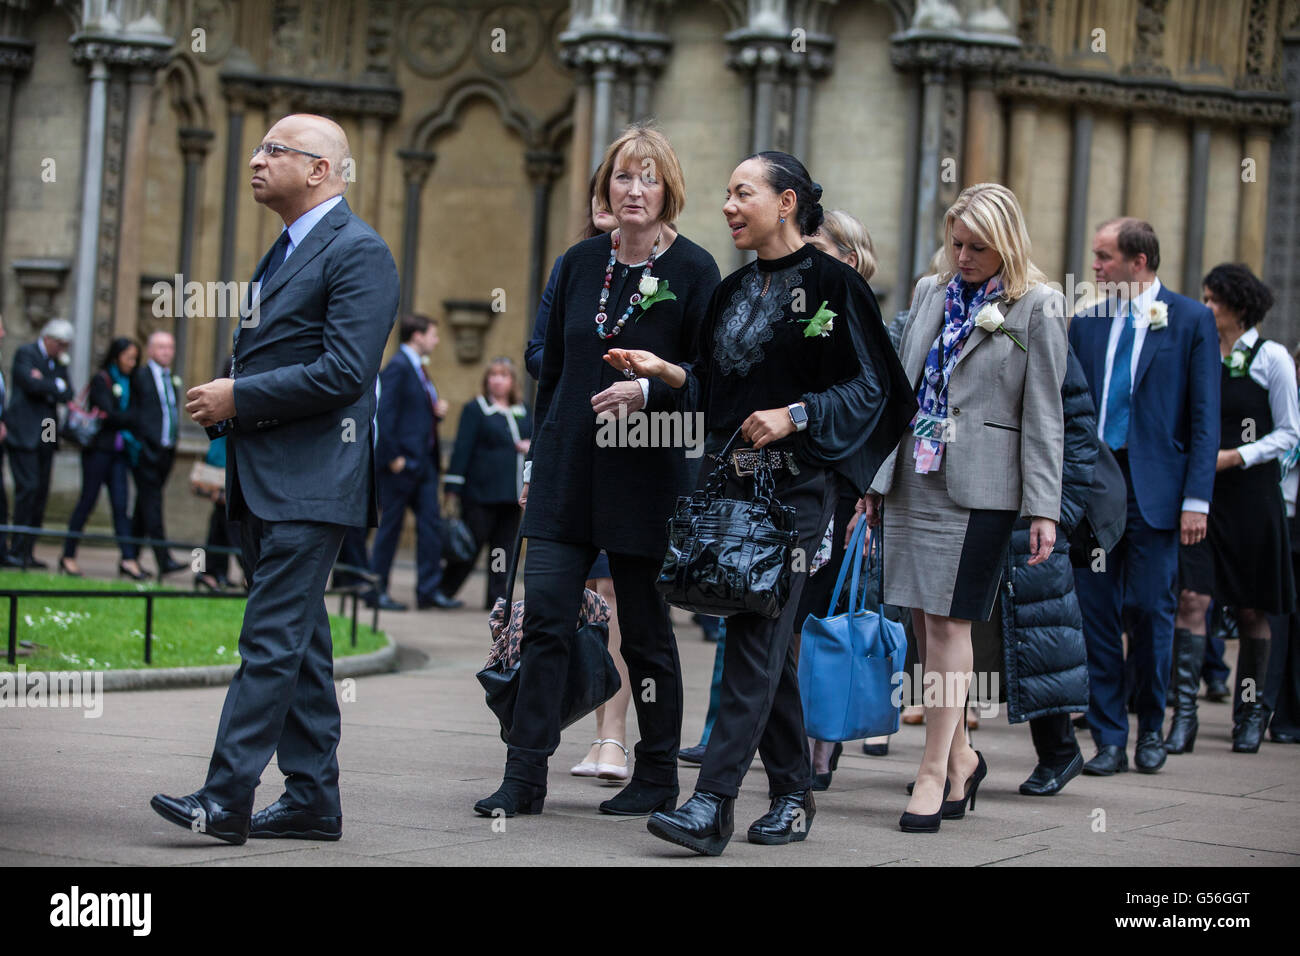 London, UK. 20th June, 2016. Harriet Harman MP and Baroness King of Bow arrive at St Margarets Church in Westminster, together with other MPs and Members of the House of Lords, for a special service in memory of Jo Cox. Attendees wore white roses. Jo Cox was killed in her constituency of Batley and Spen on 16th June. Credit:  Mark Kerrison/Alamy Live News Stock Photo